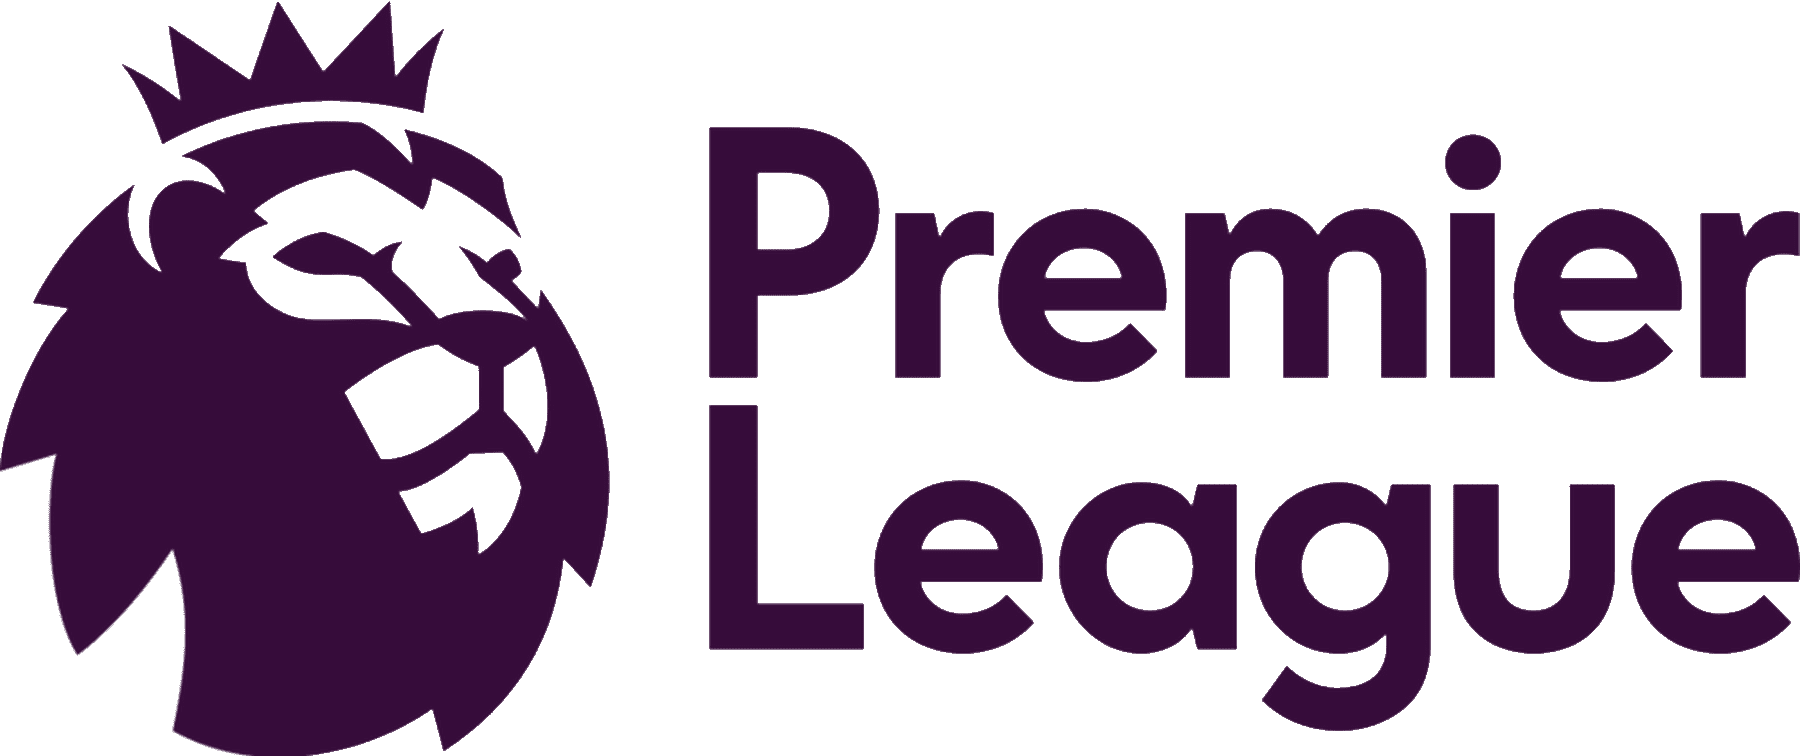 Premier League logo history and meaning